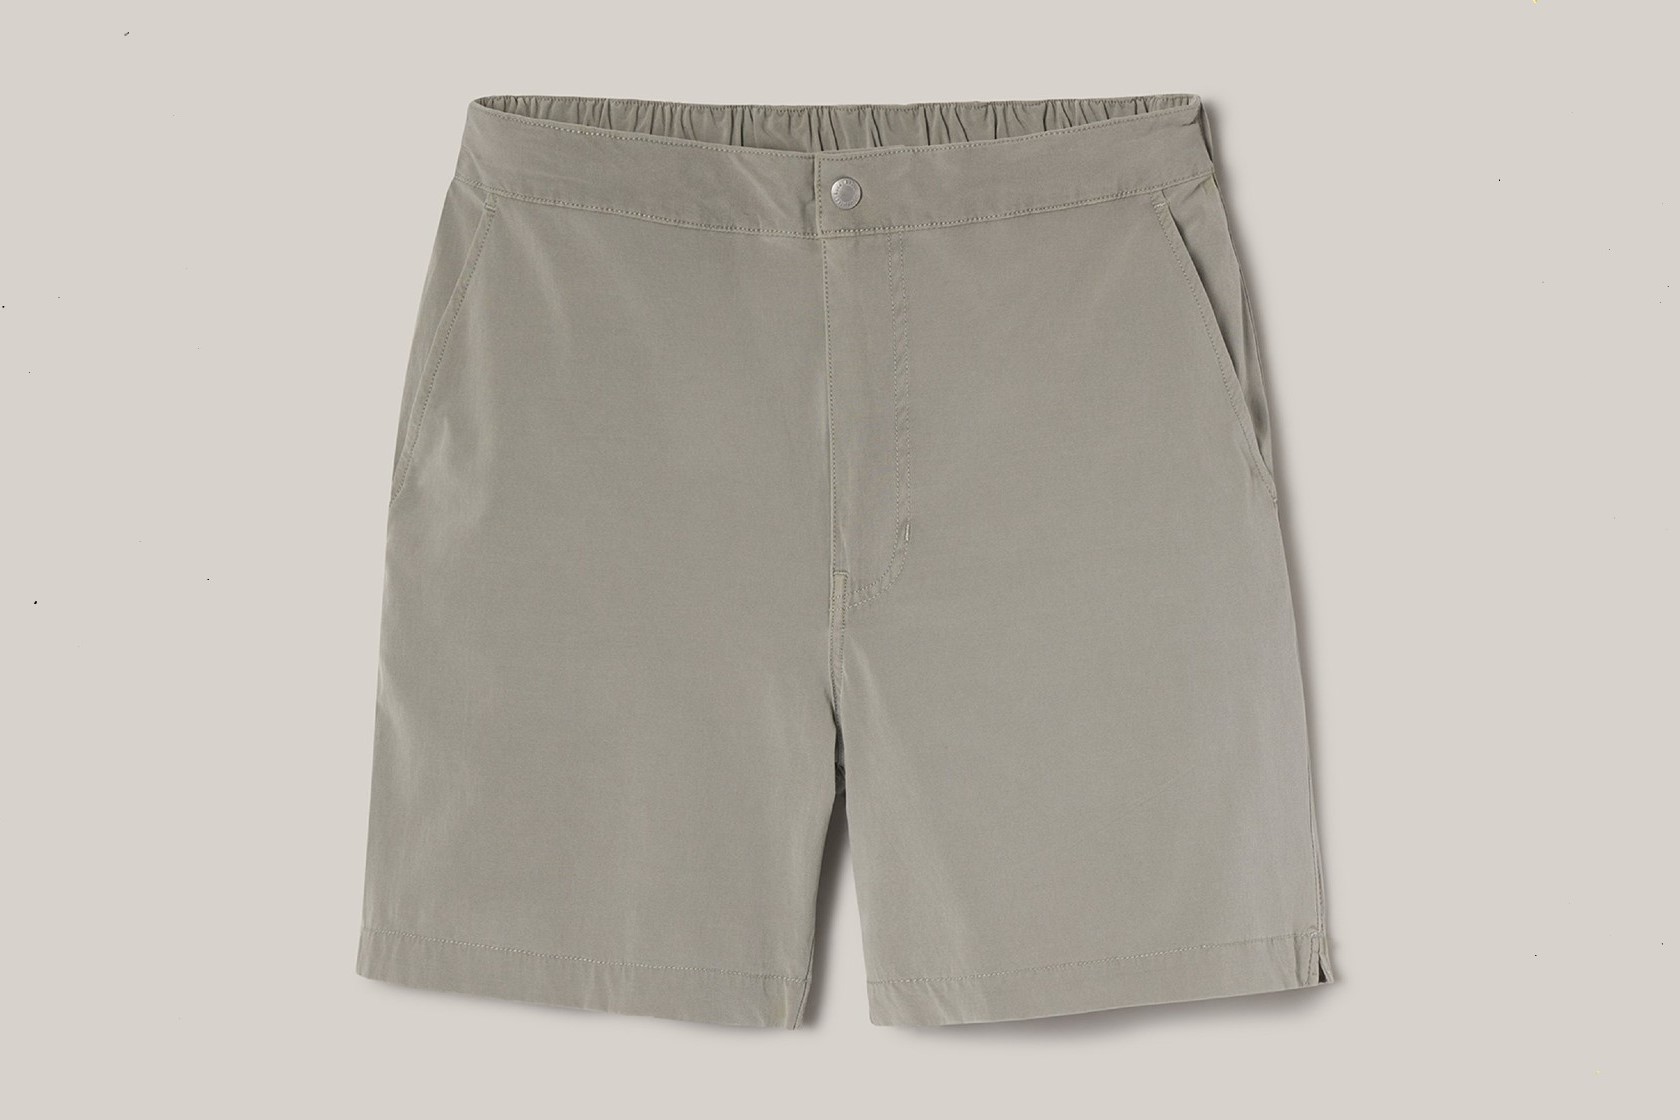 The best shorts for men to look cool on those sweltering hot days